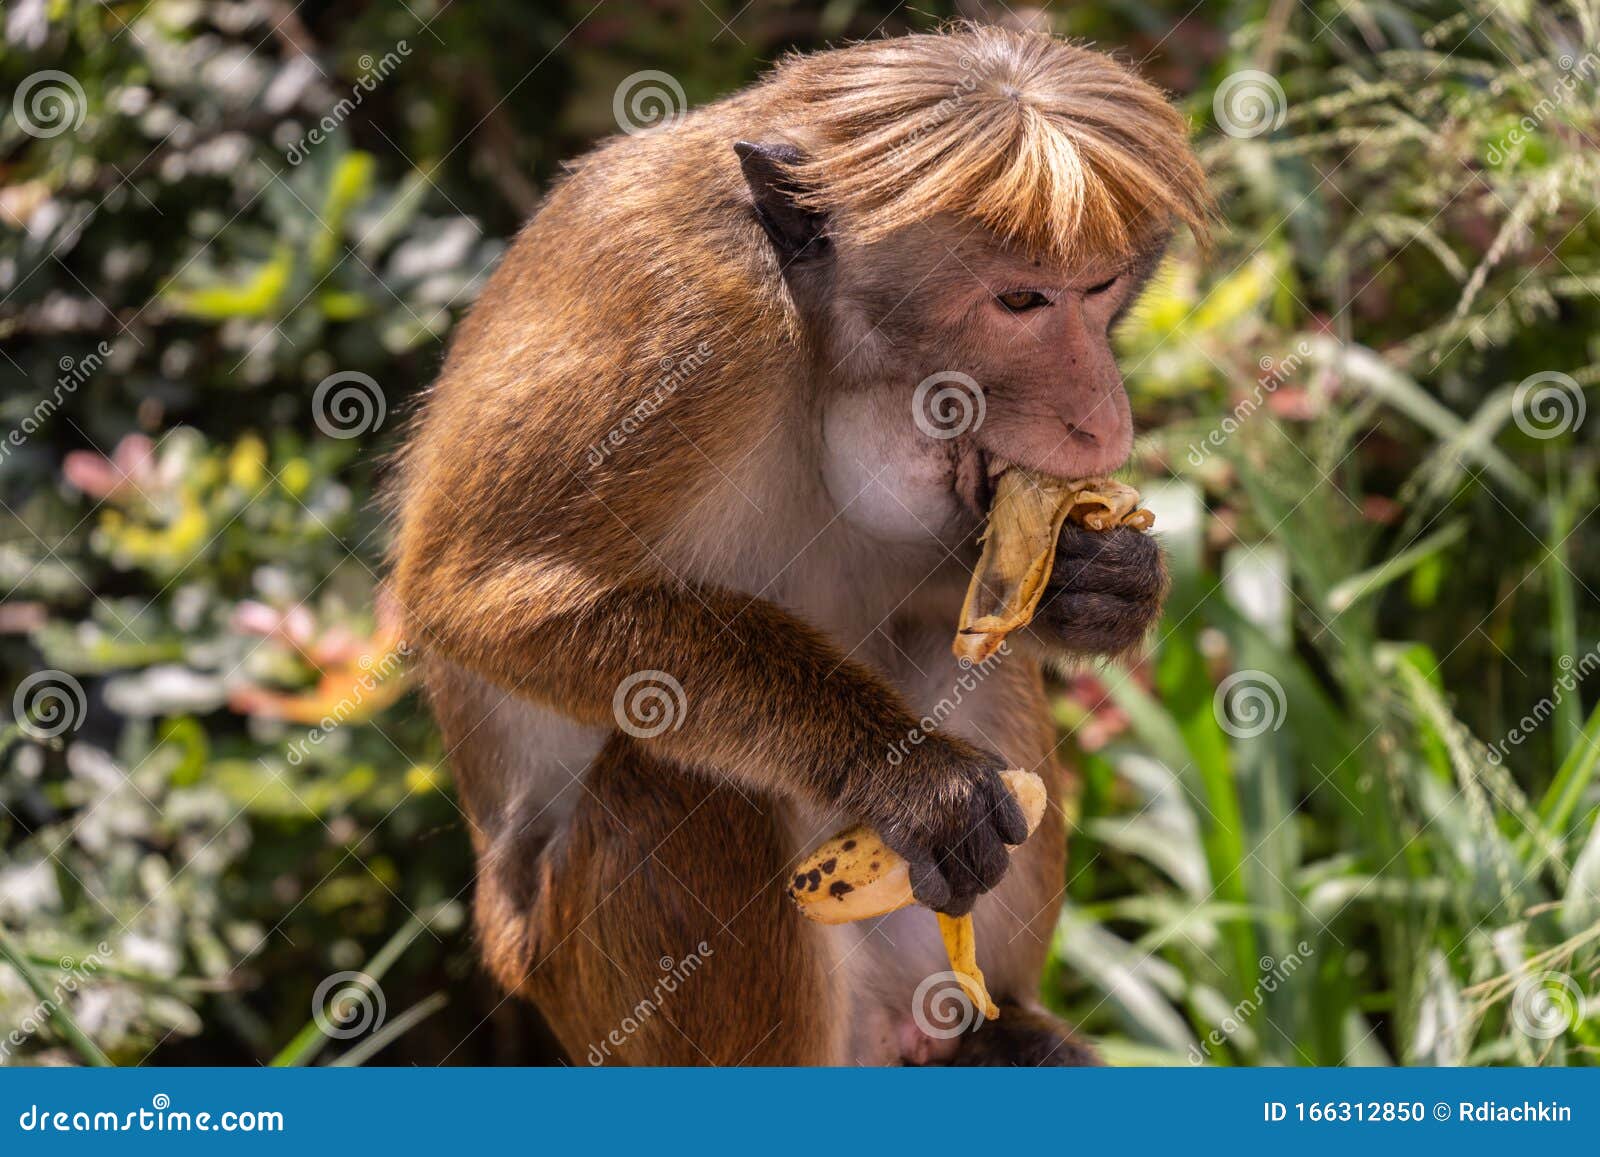 Red-haired Monkey with a Funny Hairstyle Eats a Banana Stock Photo - Image  of edge, king: 166312850